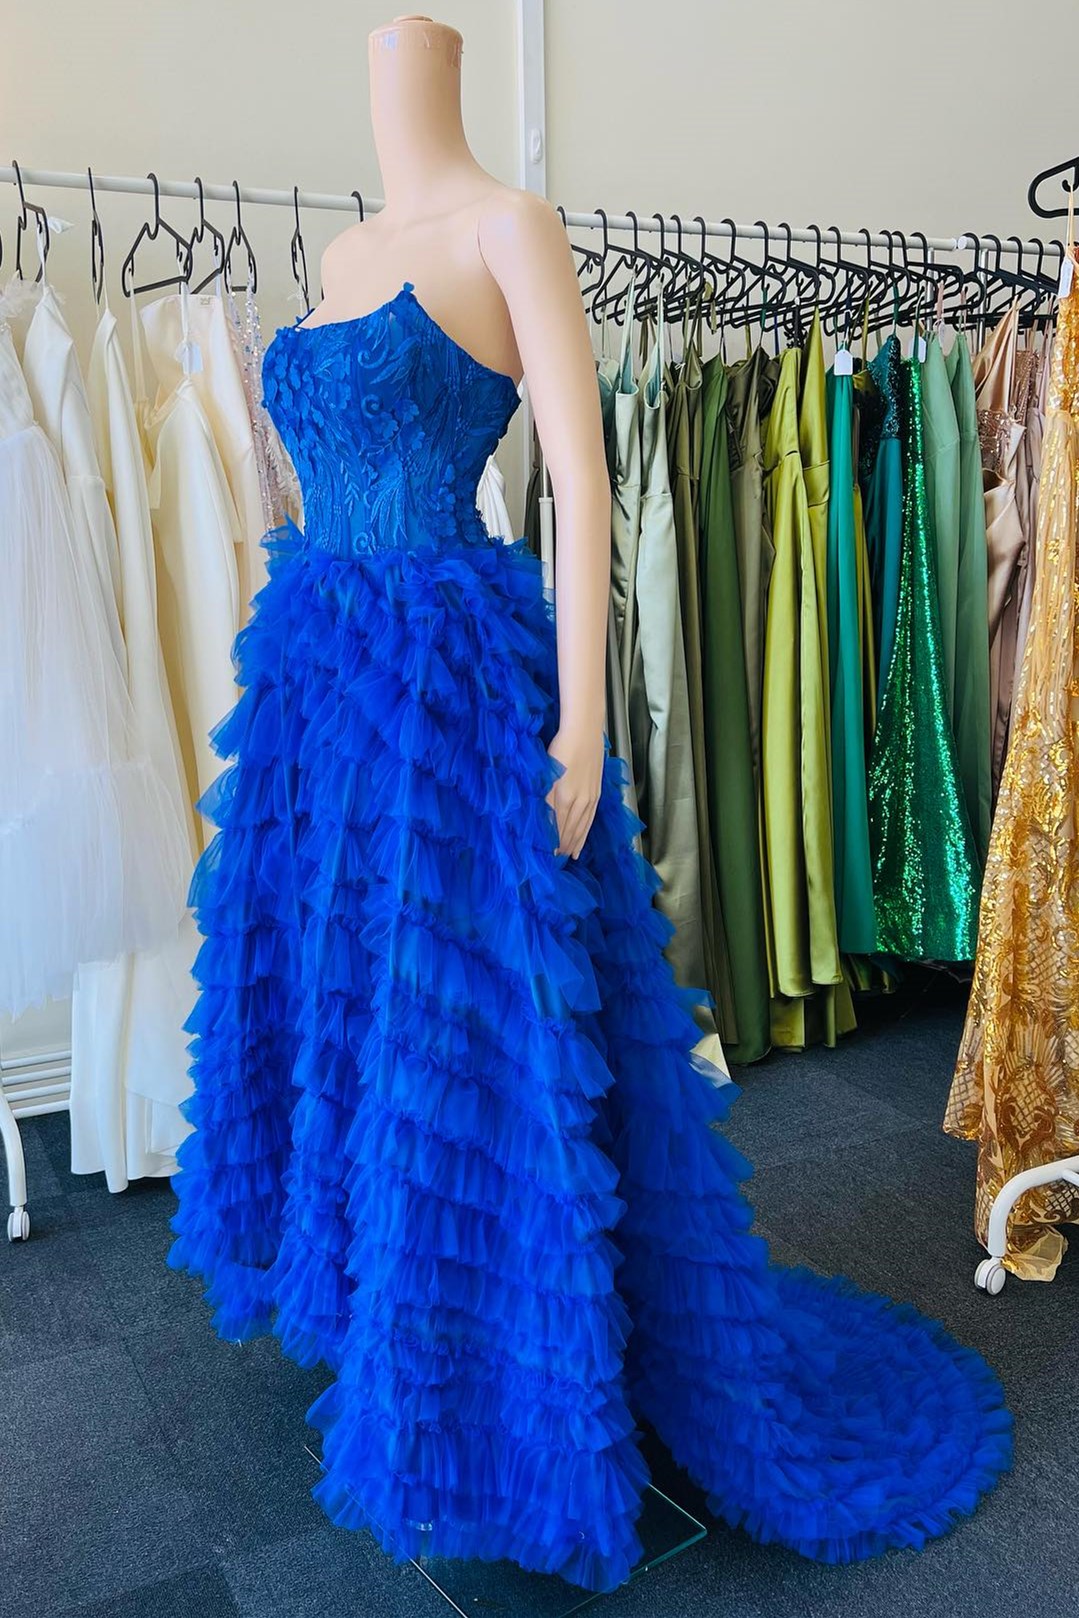 Royal Blue Strapless Floral Lace Ruffle Tiered Long Prom Dress